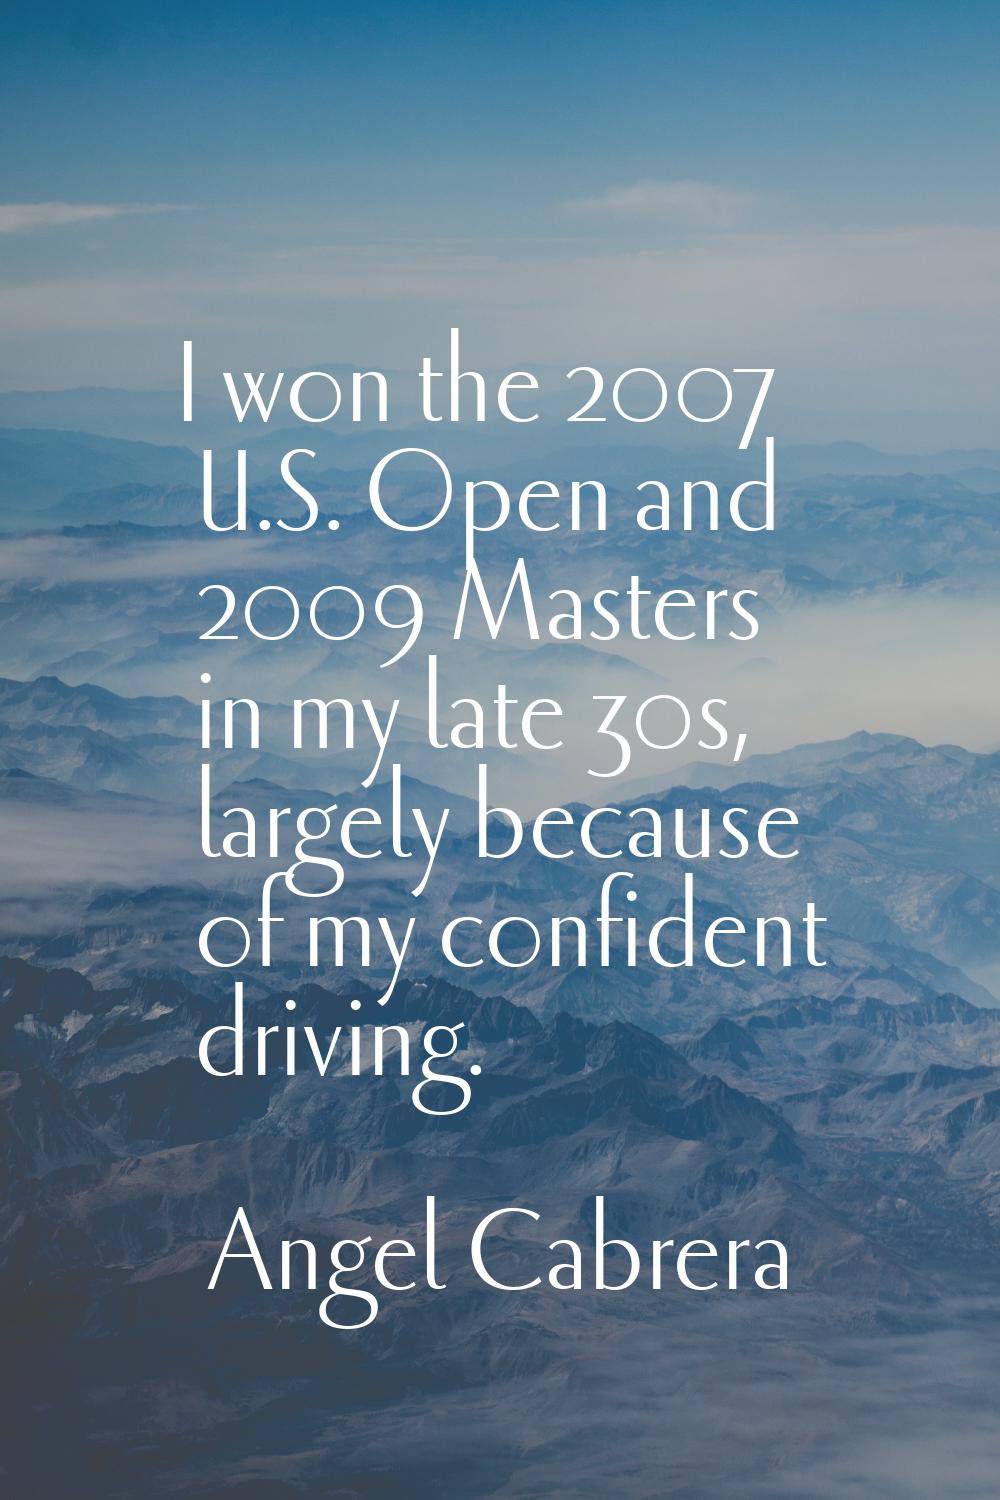 I won the 2007 U.S. Open and 2009 Masters in my late 30s, largely because of my confident driving.